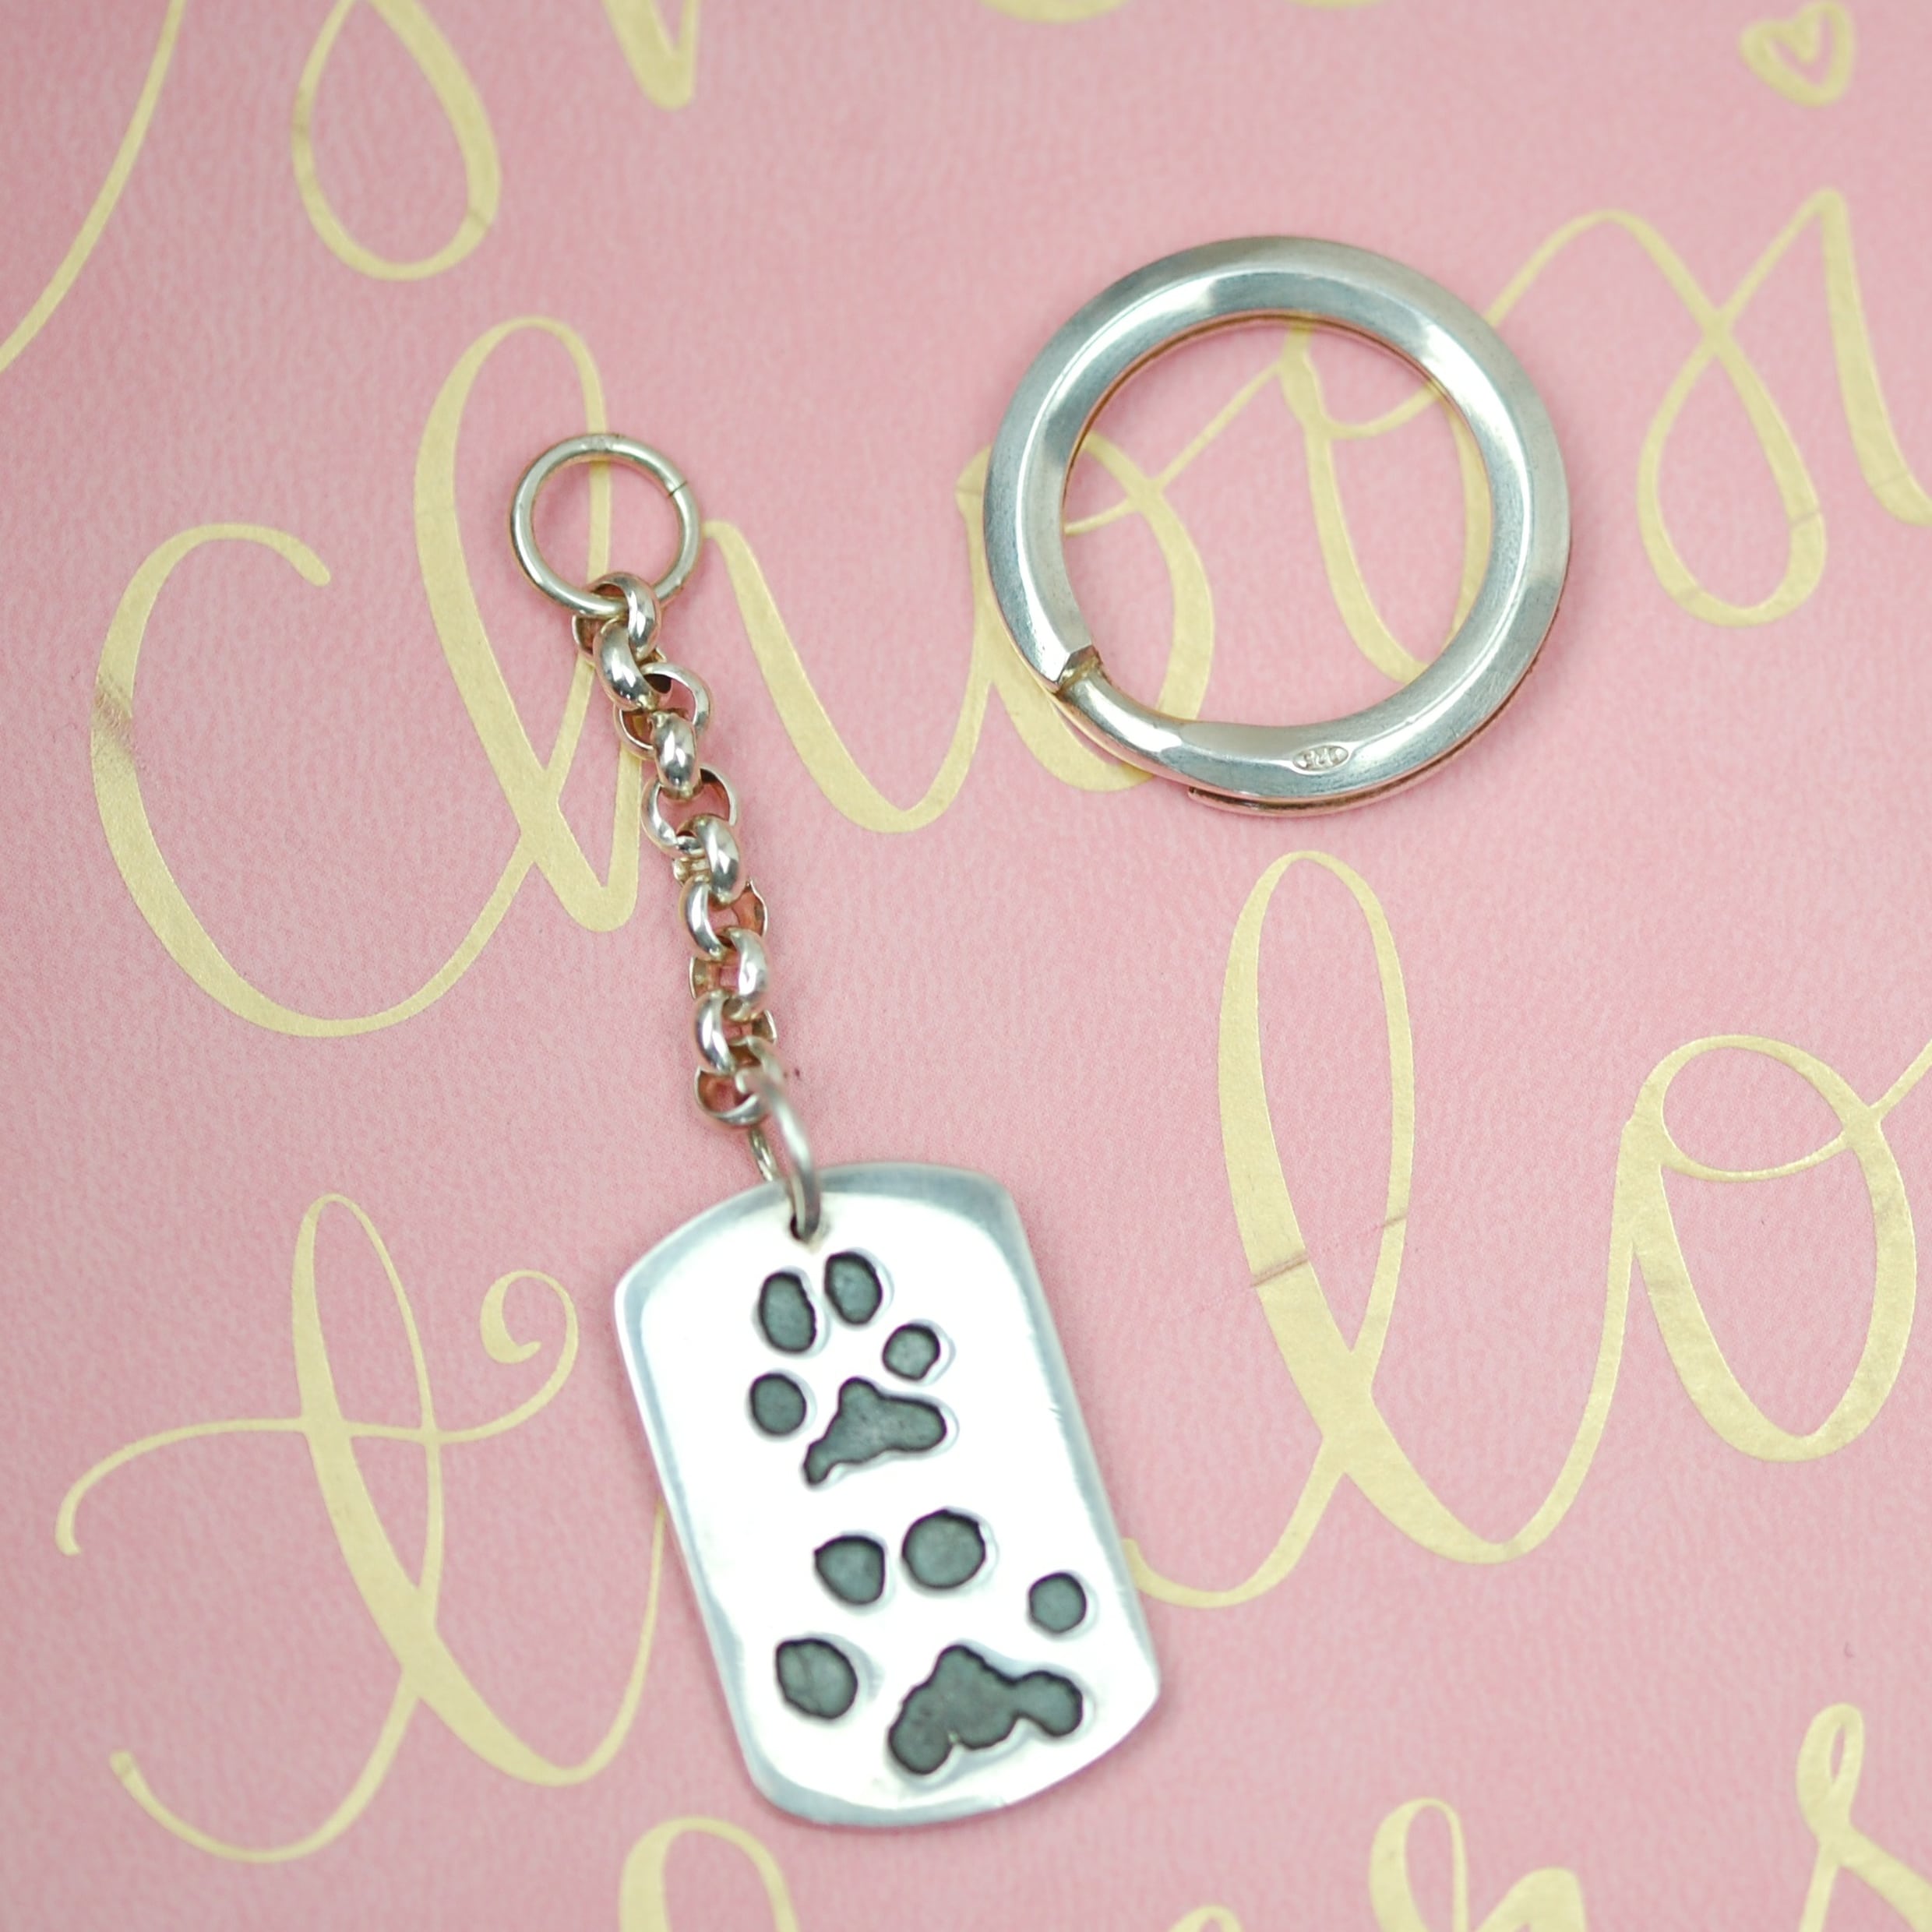 Gifts for dogs and their parents - Large sterling silver keyring with your pets unique paw prints